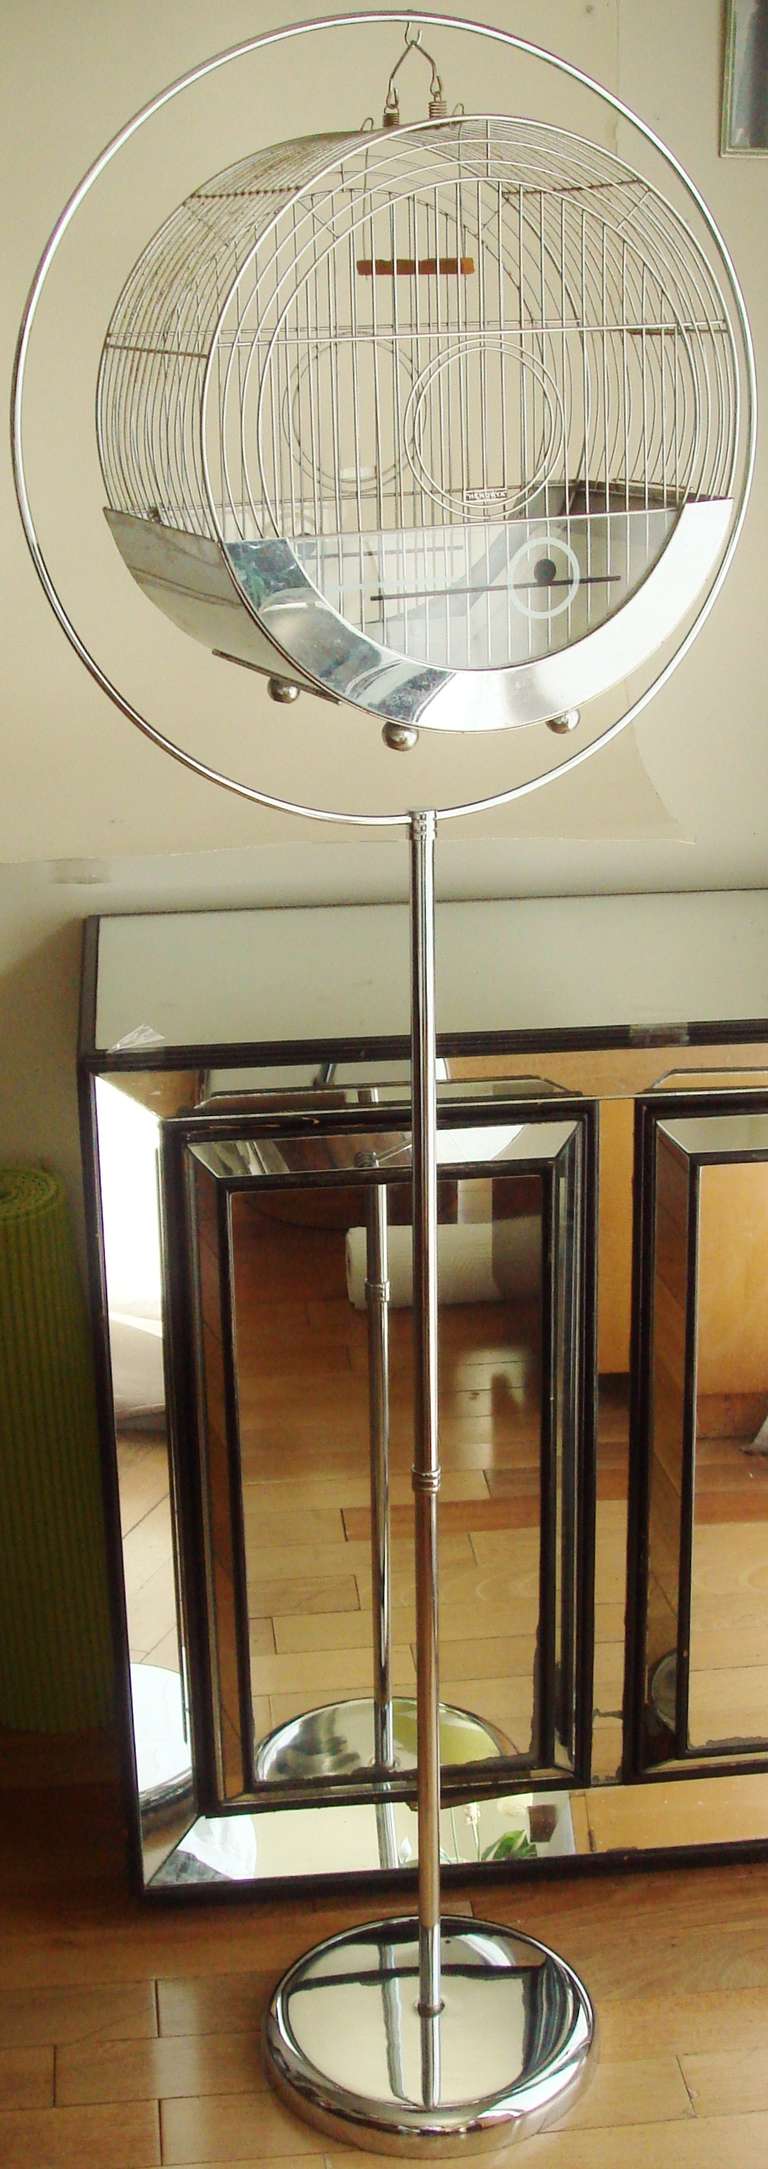 This iconic American Art Deco chrome plated 